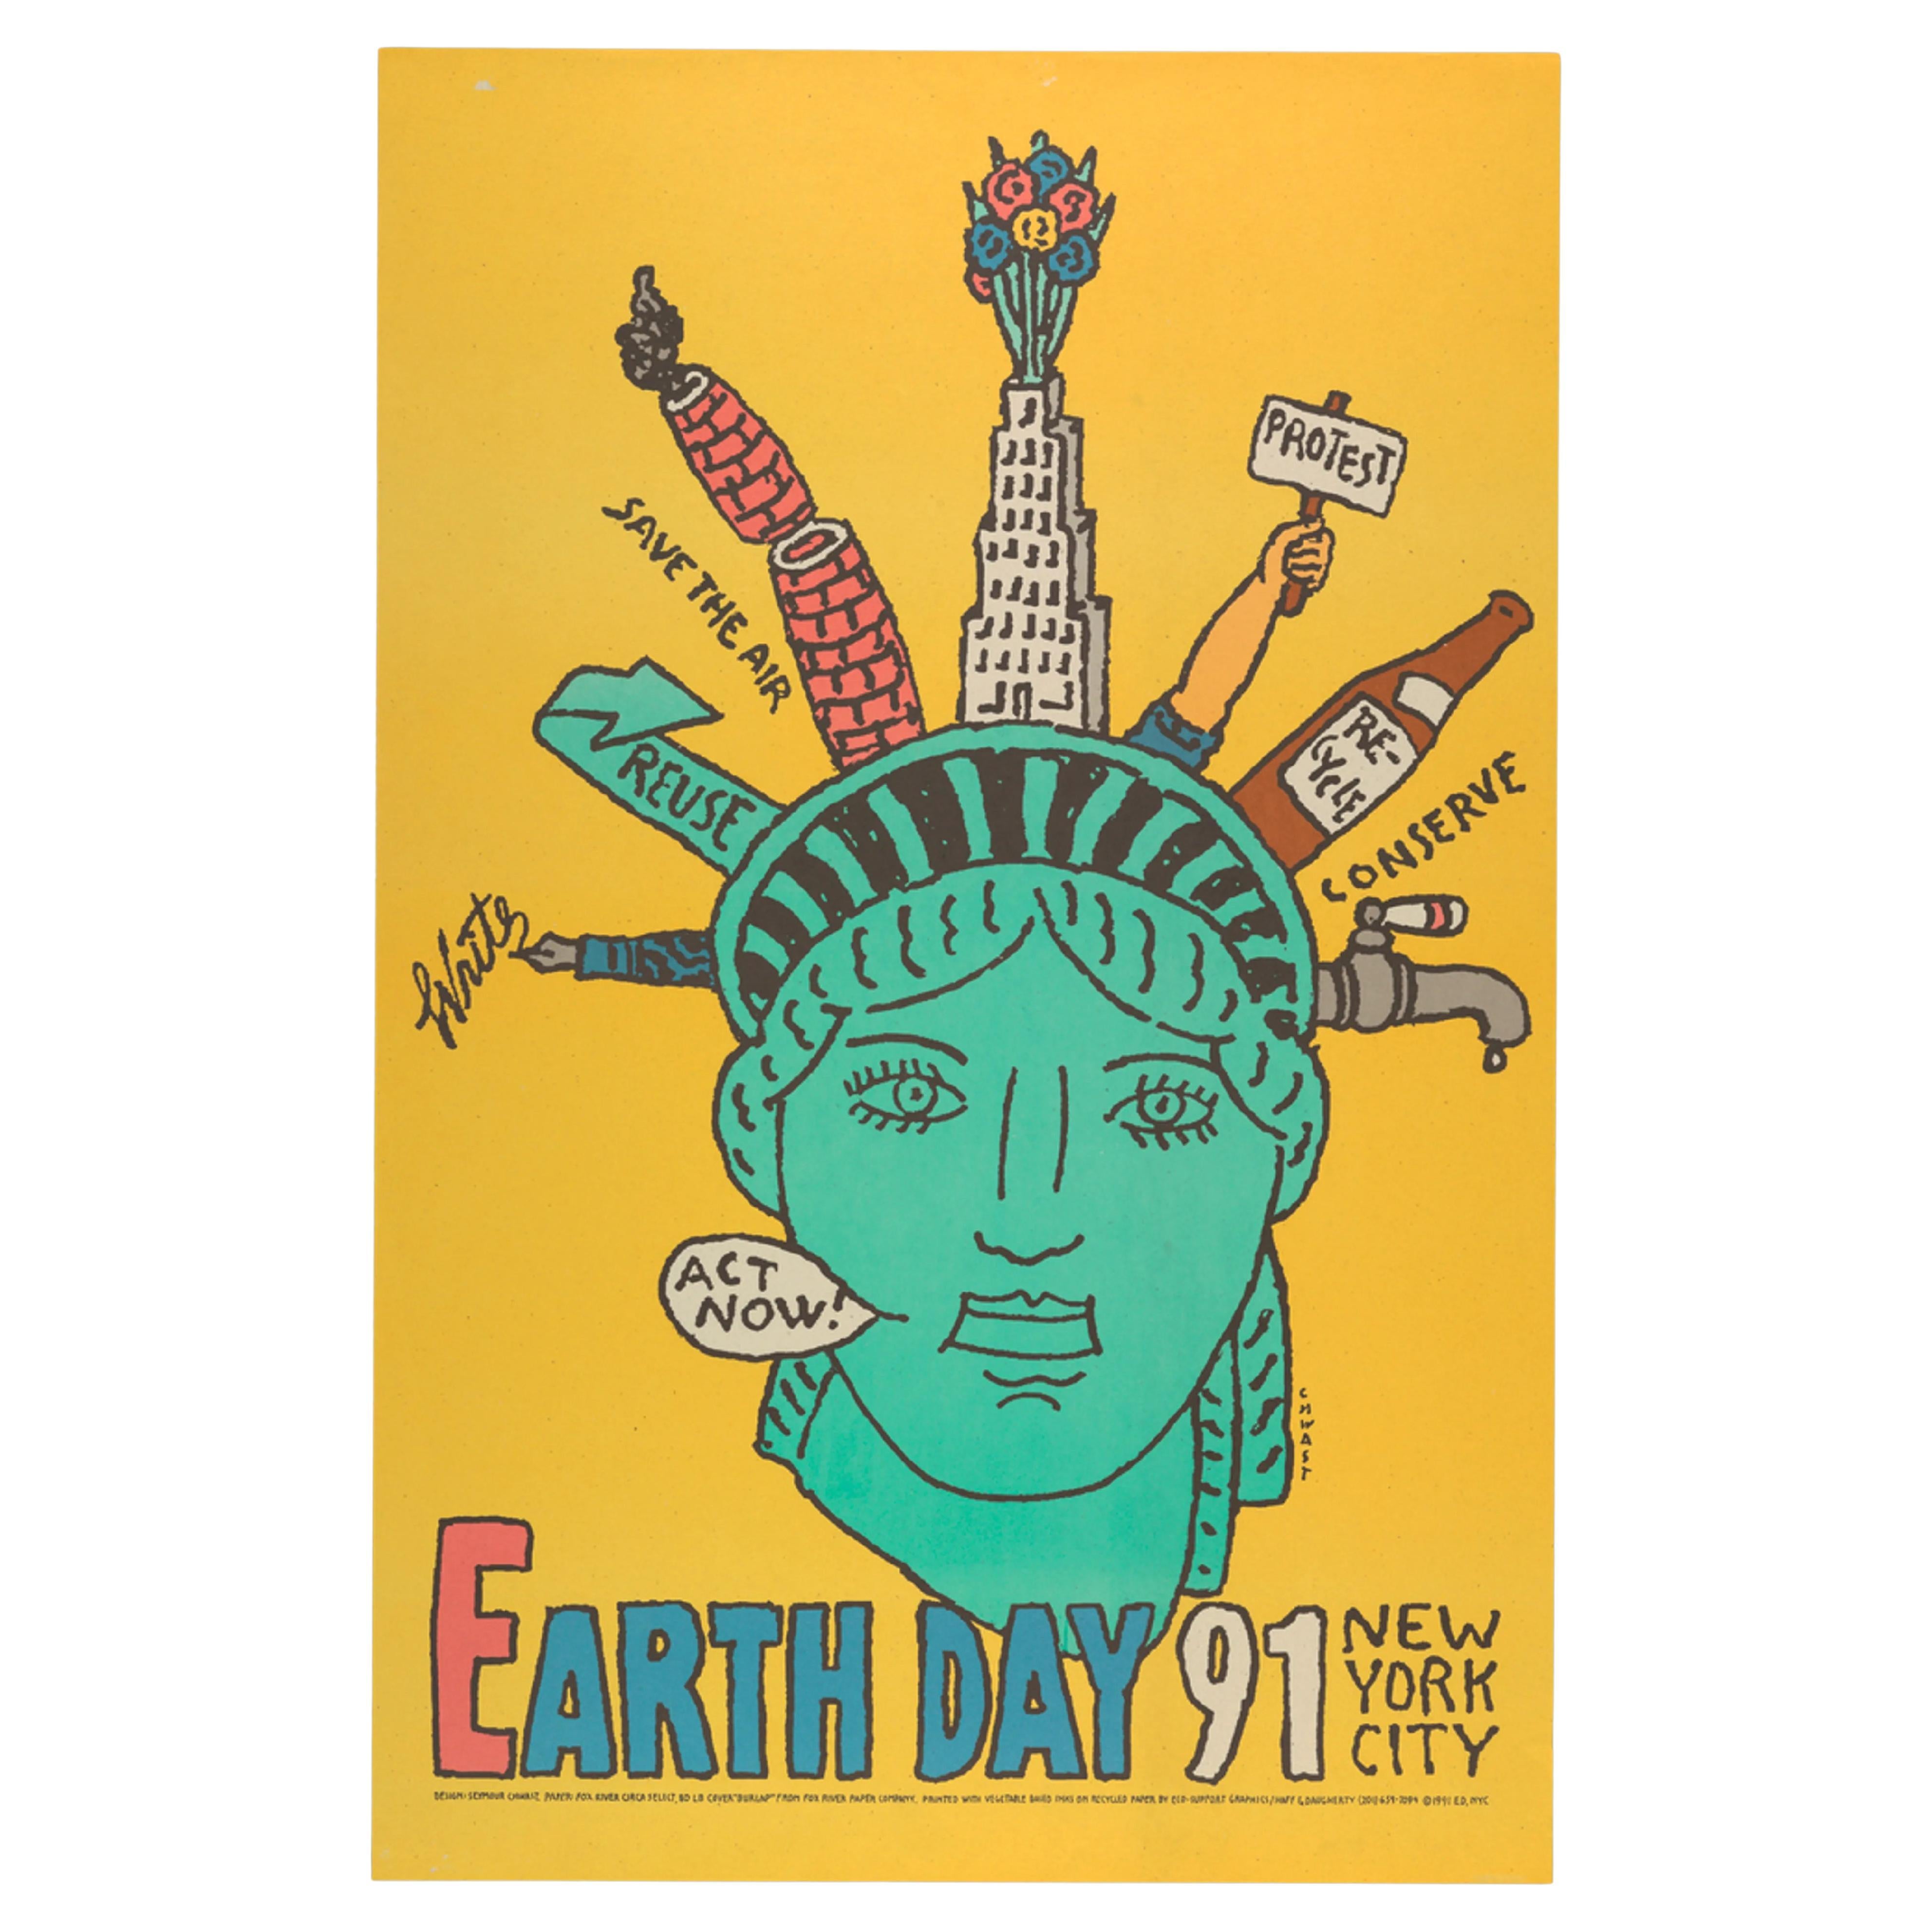 Earth Day 1991 New York City - Vintage Pop Art Poster by Seymour Chwast